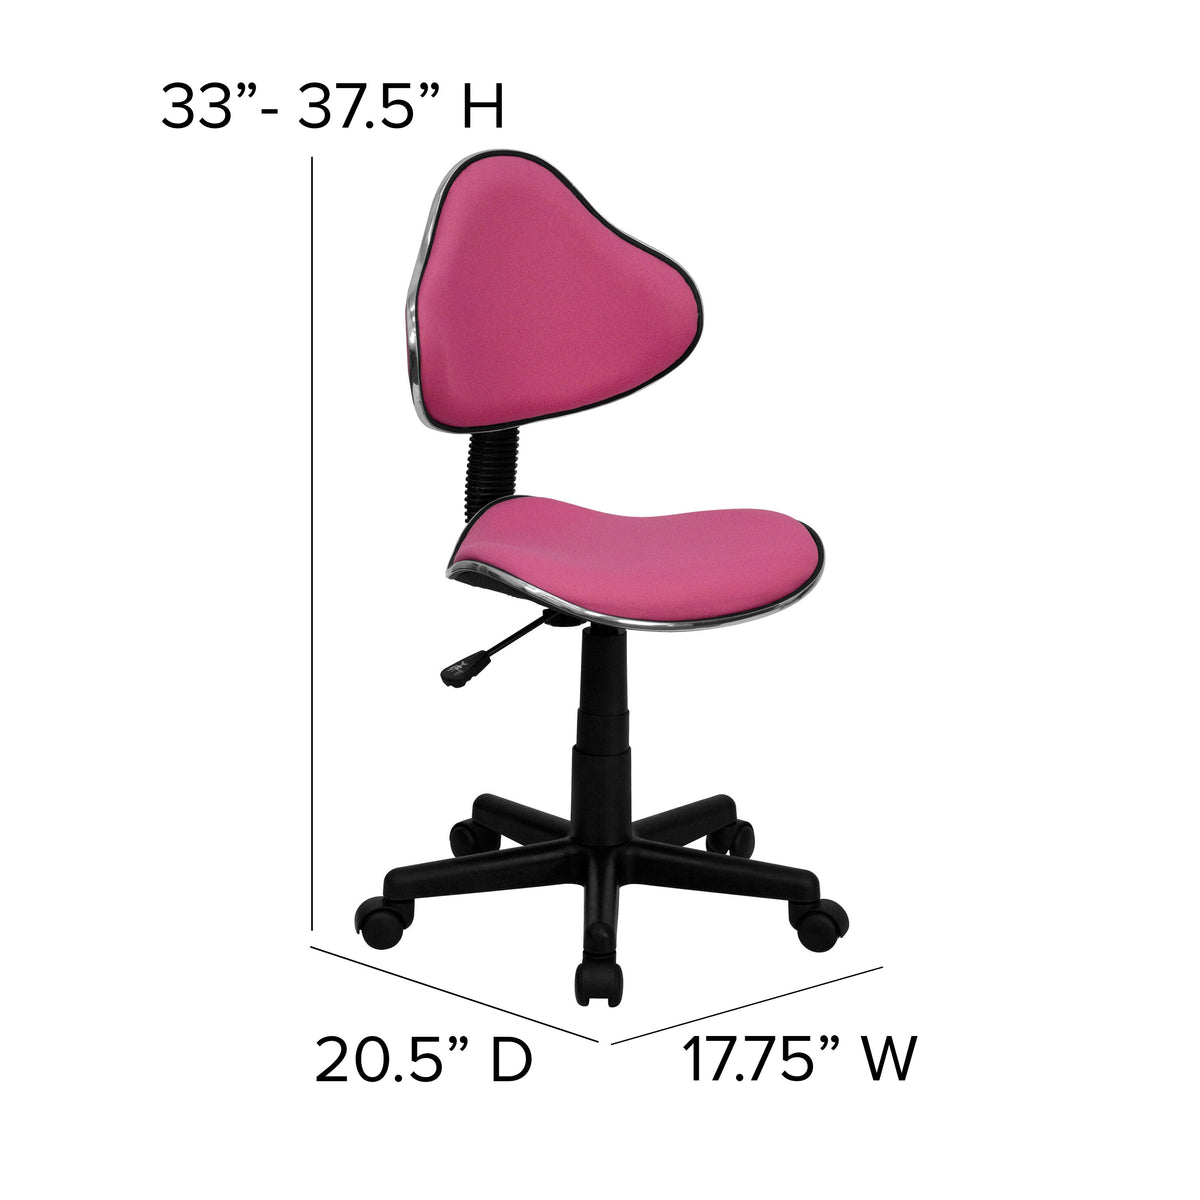 Pink |#| Pink Fabric Low Back Swivel Ergonomic Task Office Chair with Adjustable Height